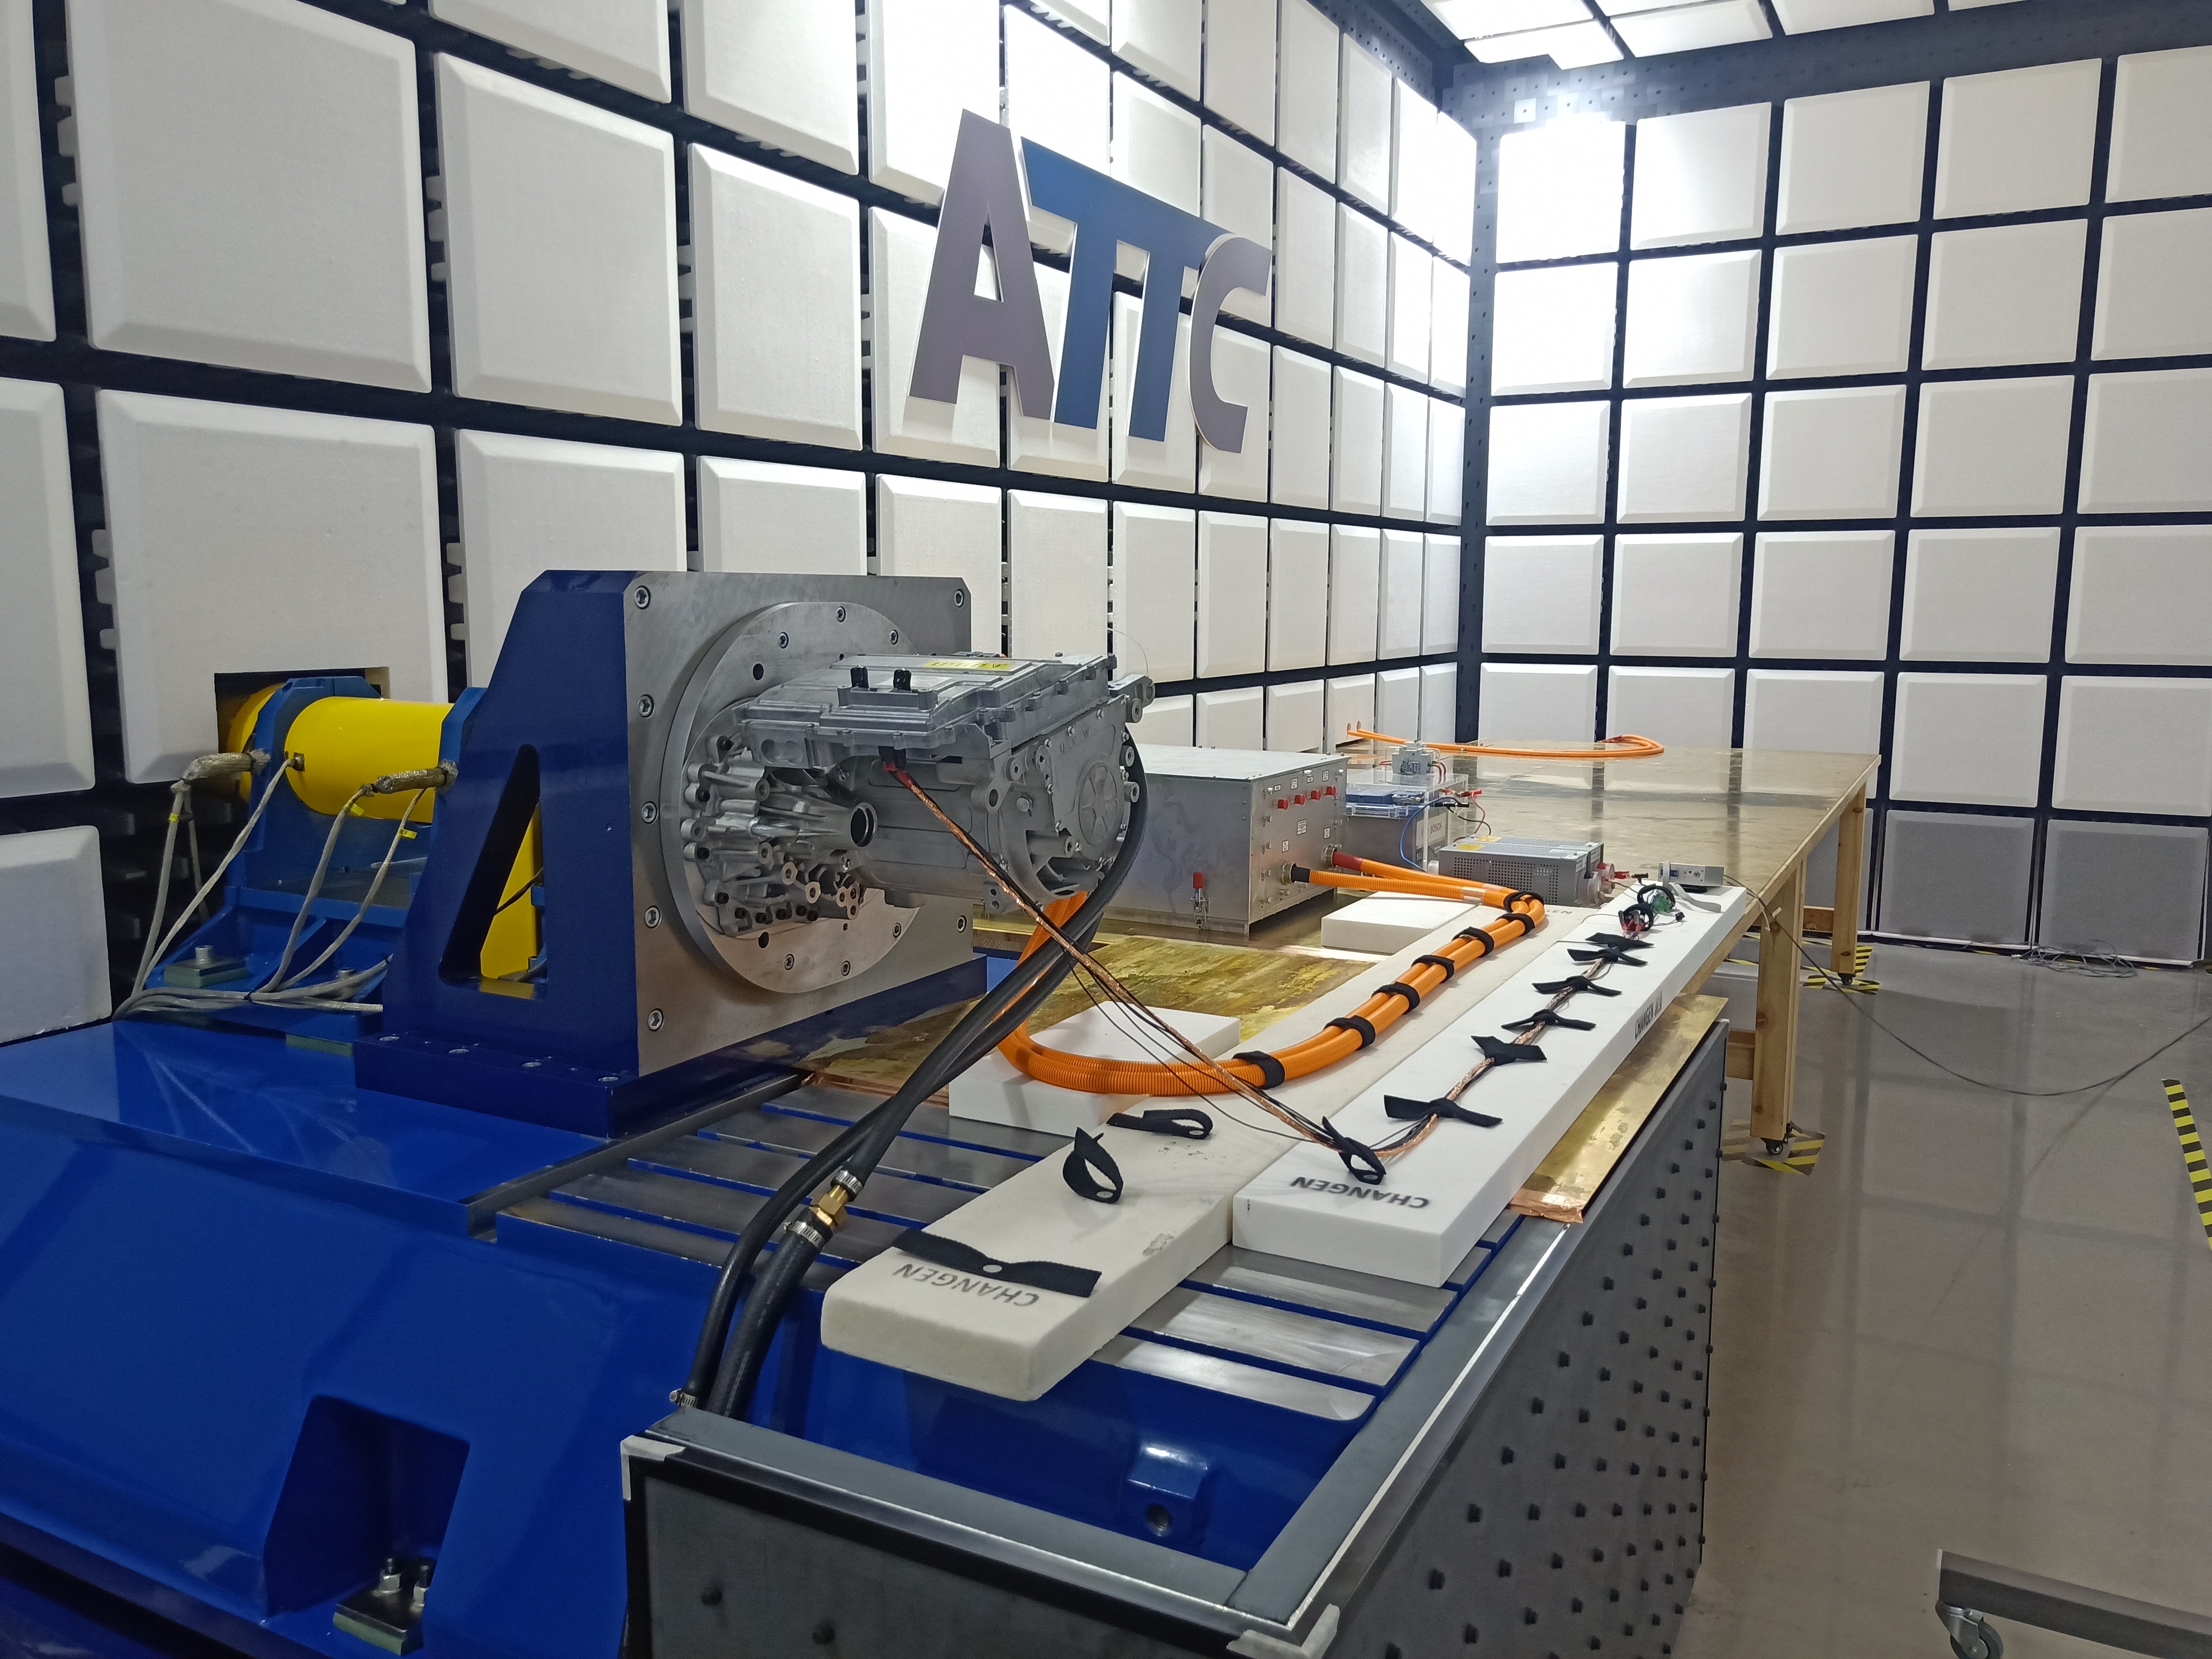 The EMC/EMI dynamometer system of the high-speed electric drive system provided by our company for ATTC was successfully tested for the first time.